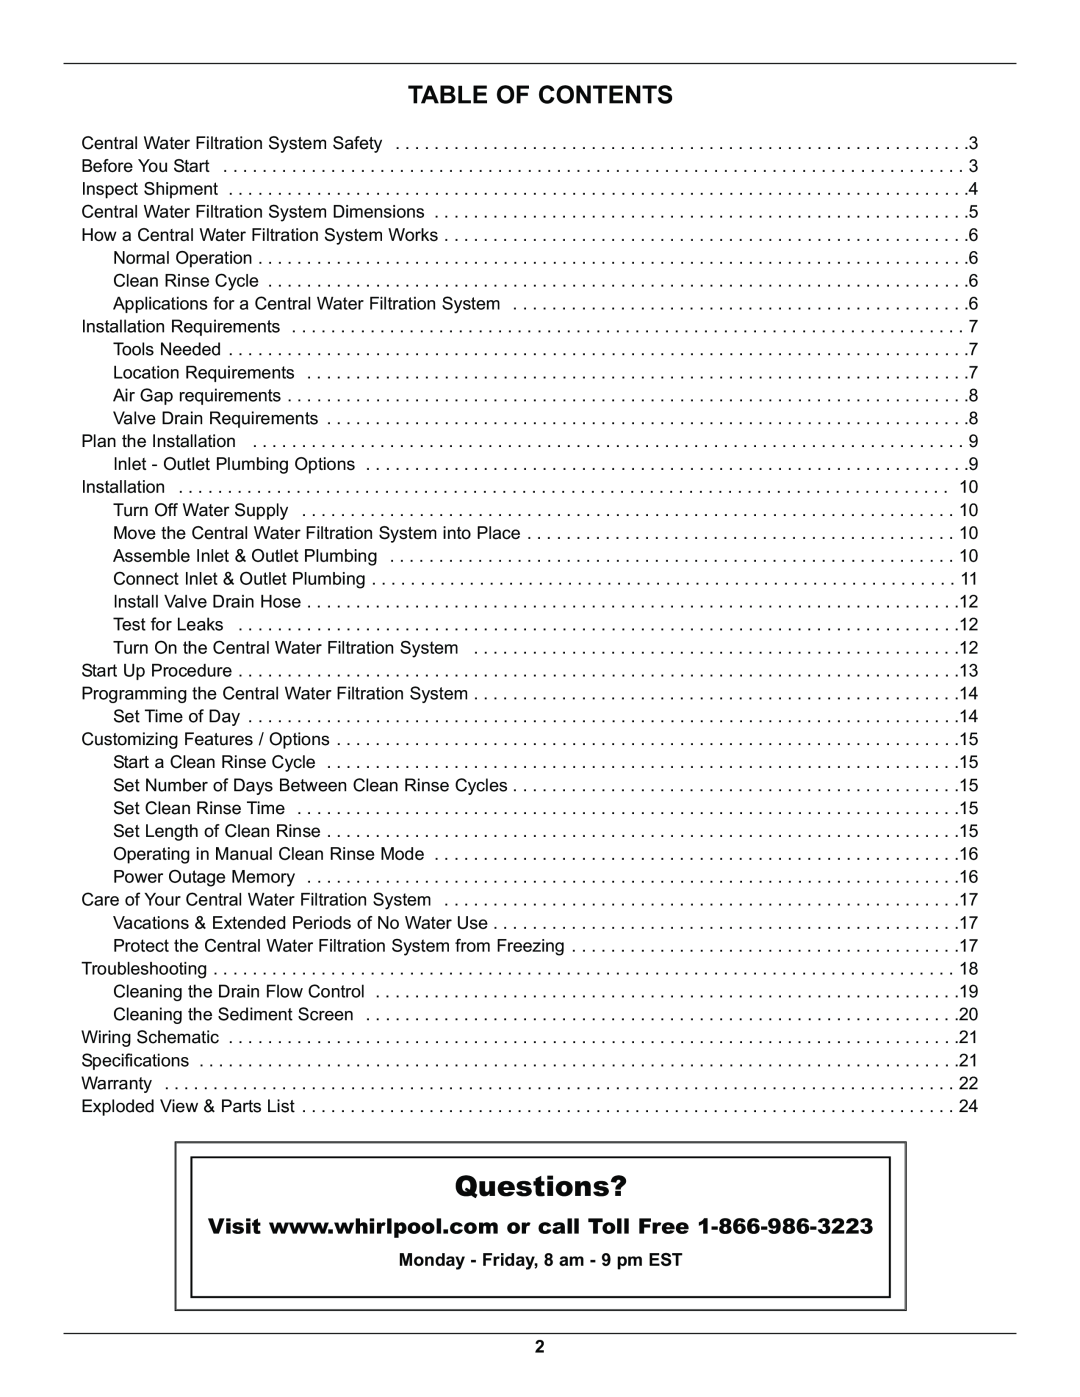 Whirlpool WHELJ1 manual Table Of Contents, Monday - Friday, 8 am - 9 pm EST, Questions? 